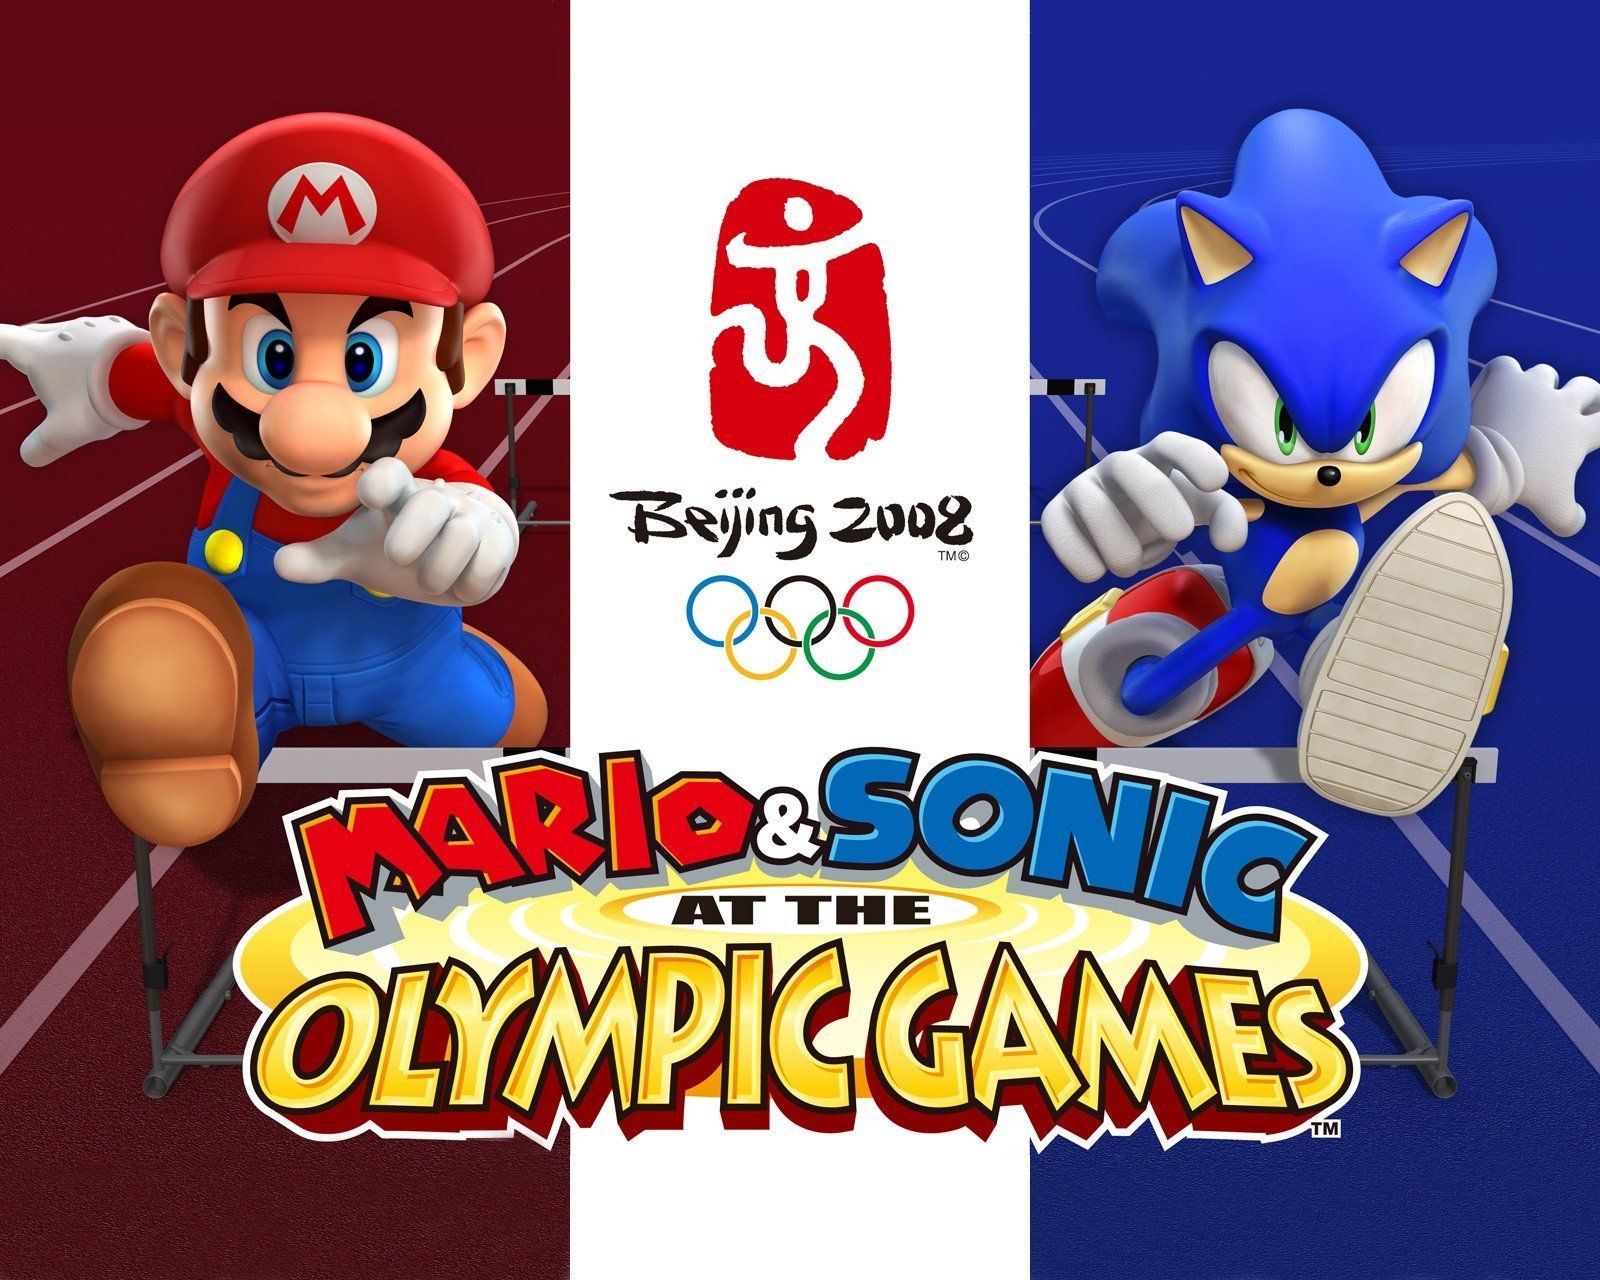 Mario & Sonic at the Olympic Games Wallpaper